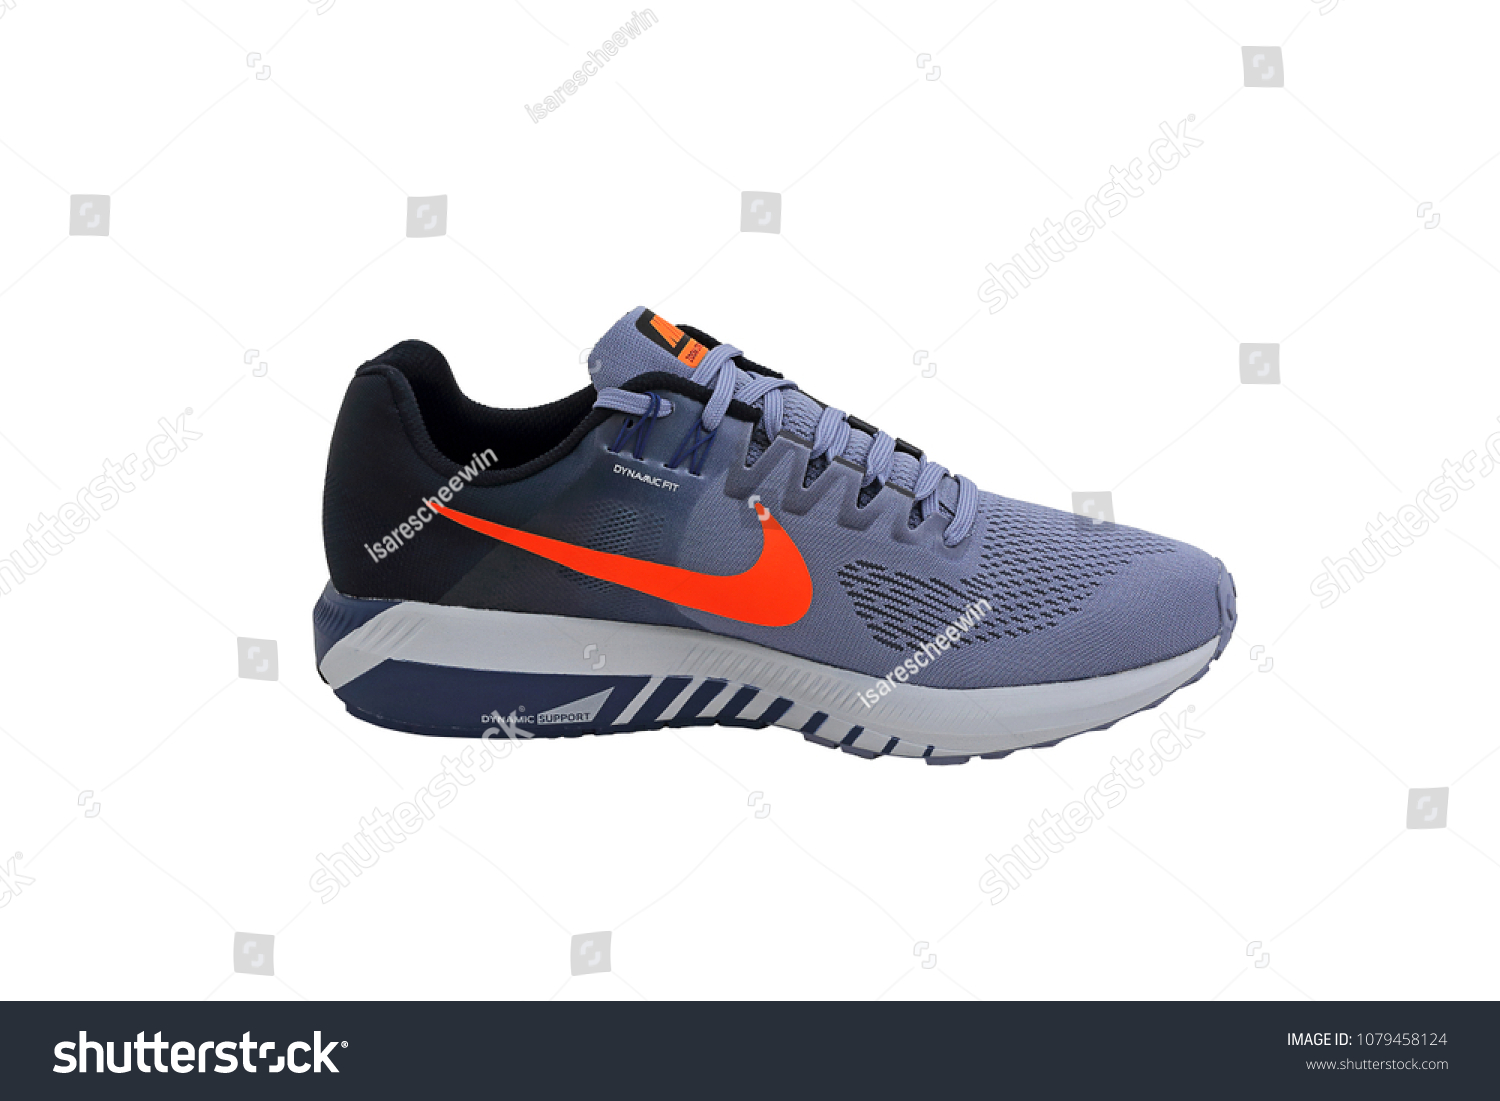 nike dynamic fit shoes